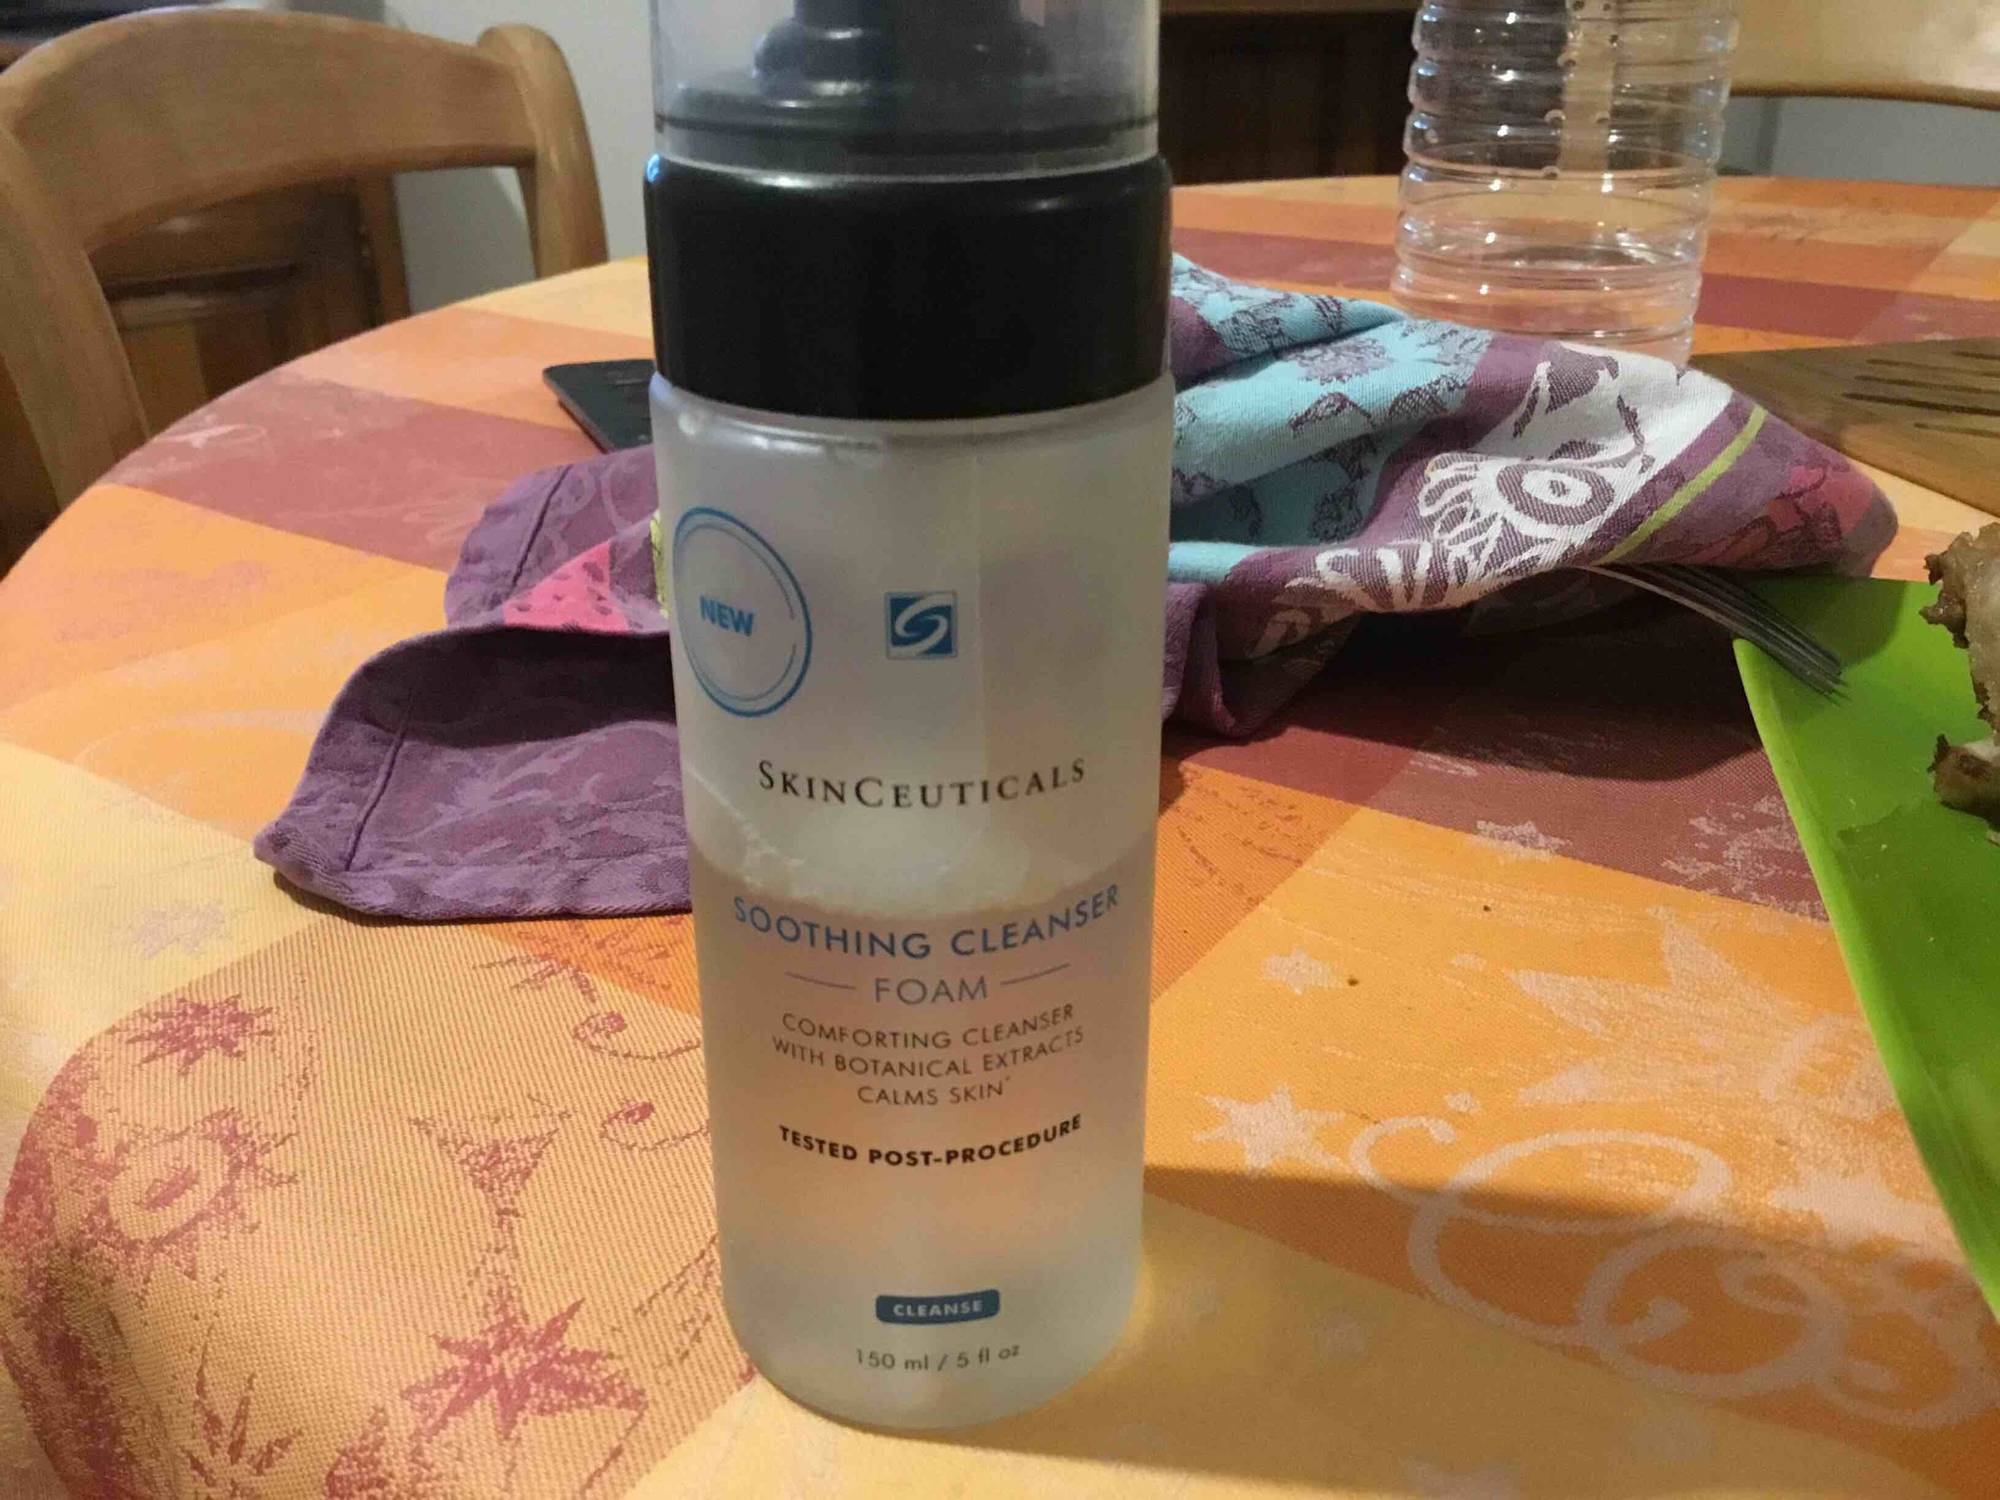 SKINCEUTICALS - Soothing cleanser foam 